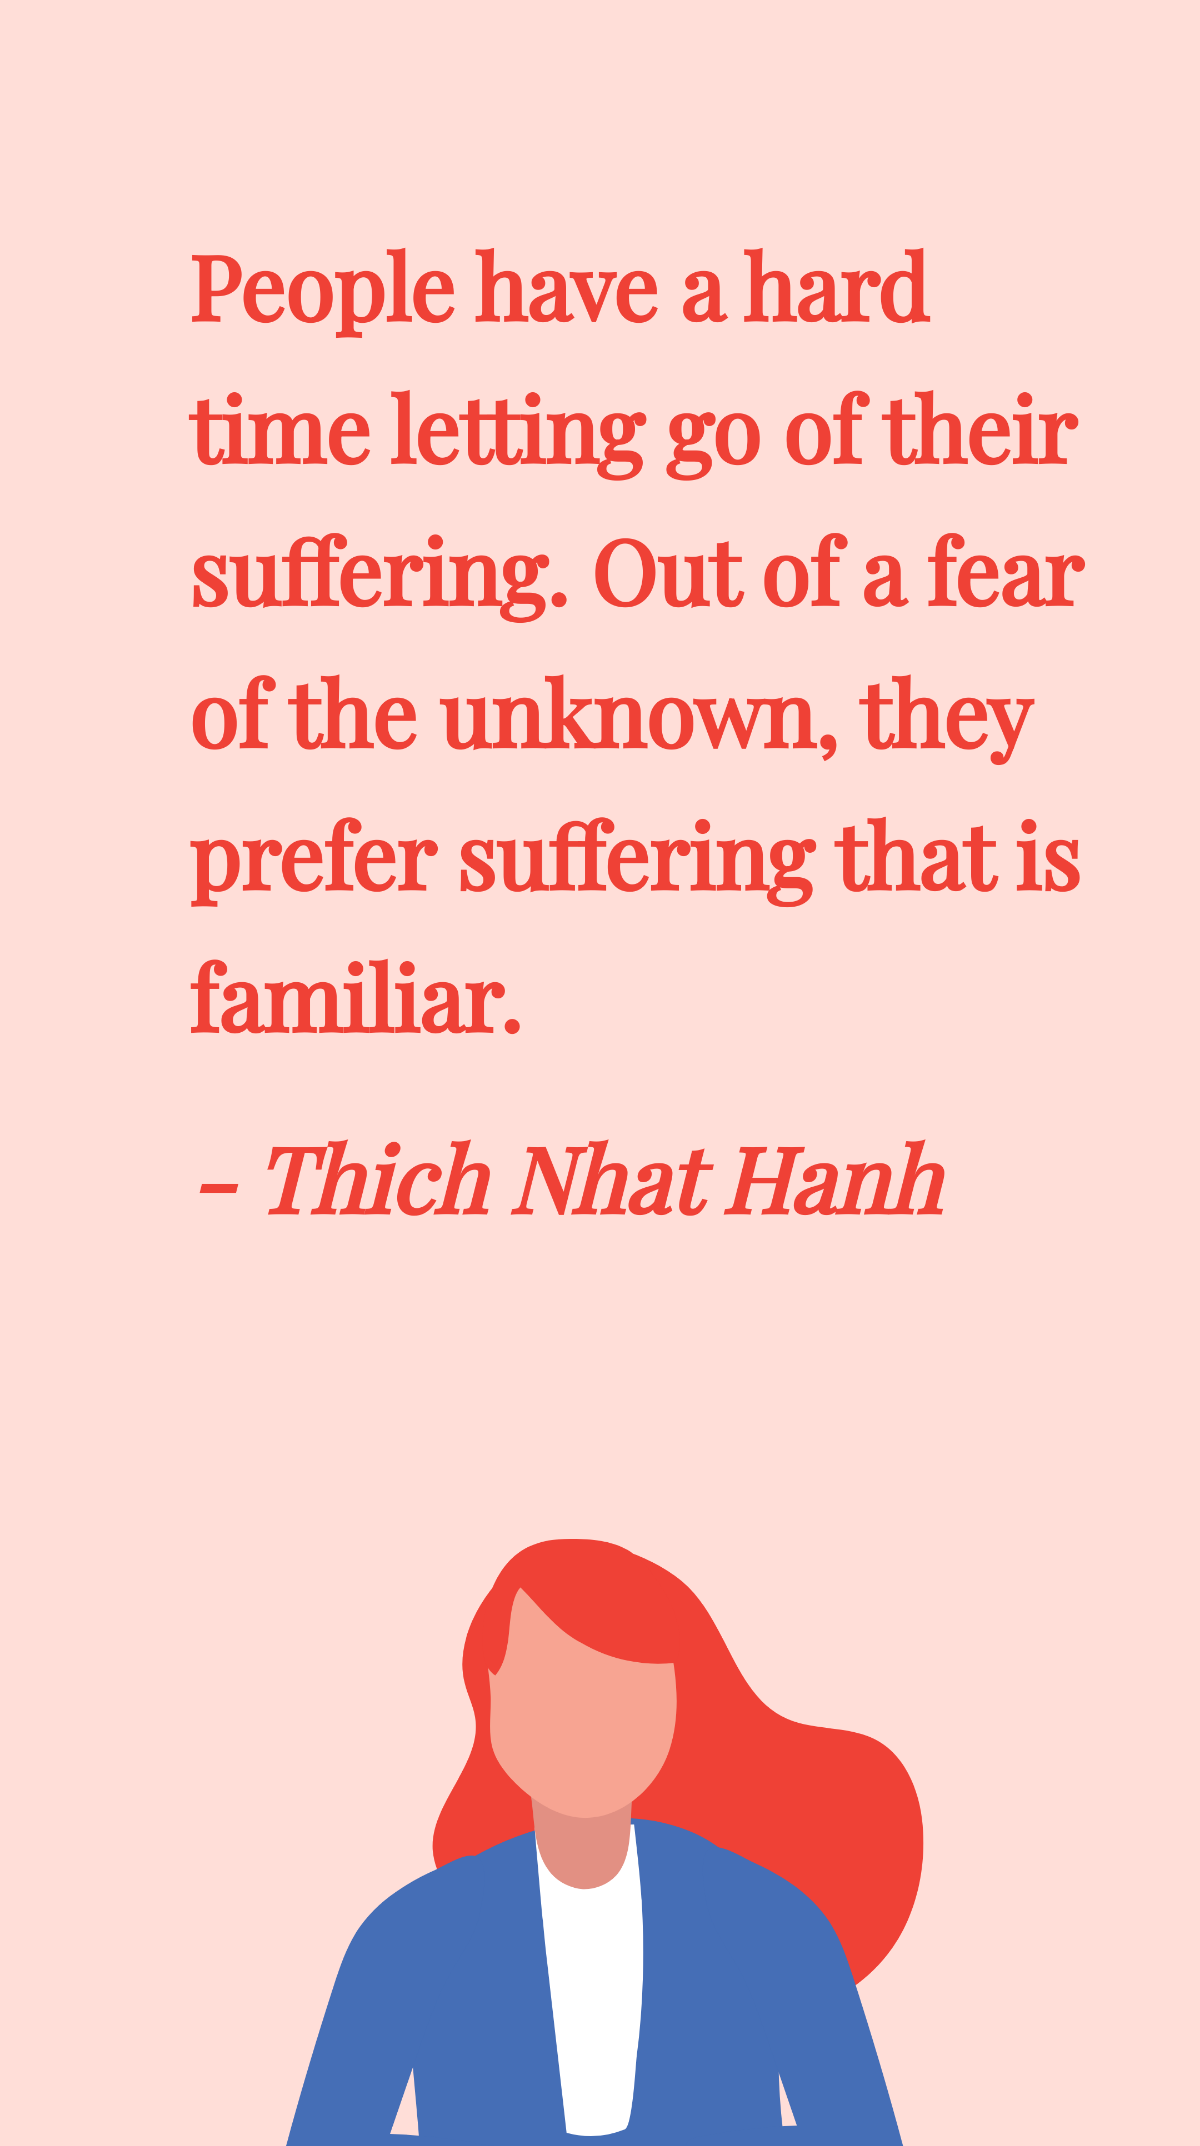 Thich Nhat Hanh - People have a hard time letting go of their suffering. Out of a fear of the unknown, they prefer suffering that is familiar. Template